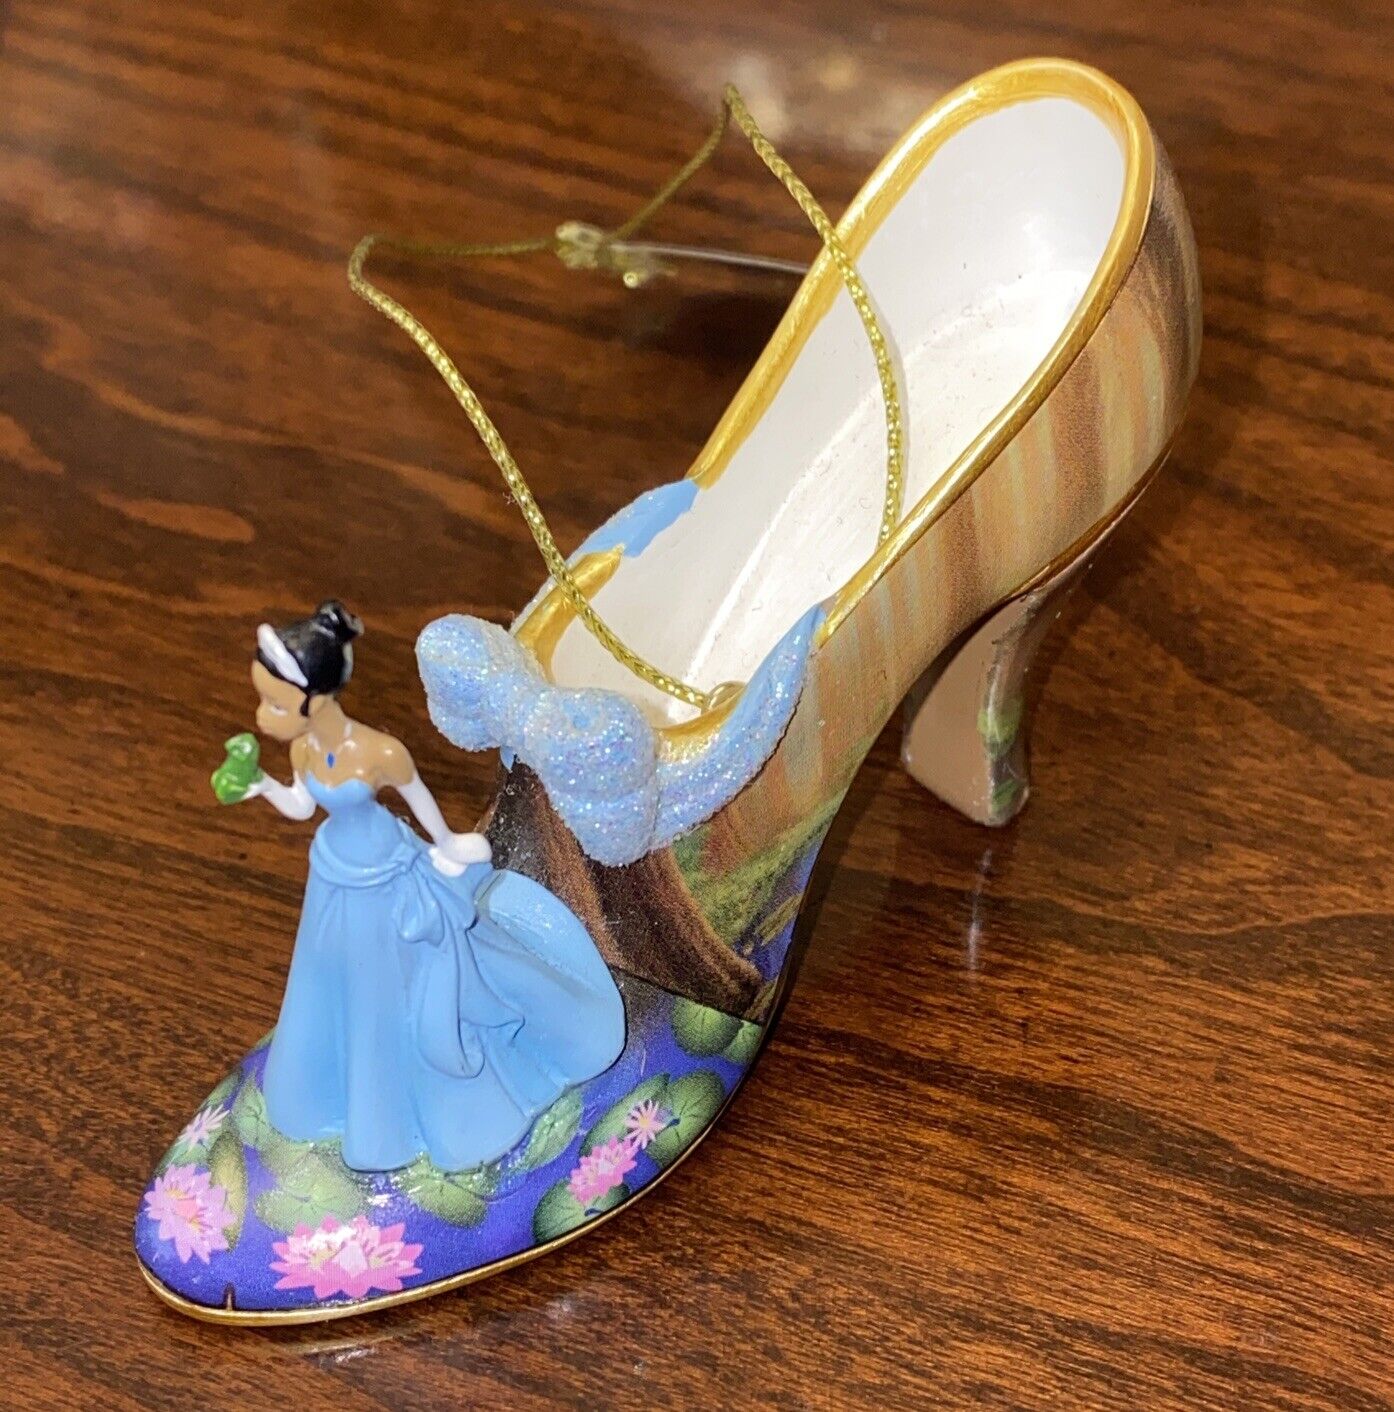 Bradford Exchange Disneys Once Upon a Slipper Ornament- Tiana A Kiss to Dream On